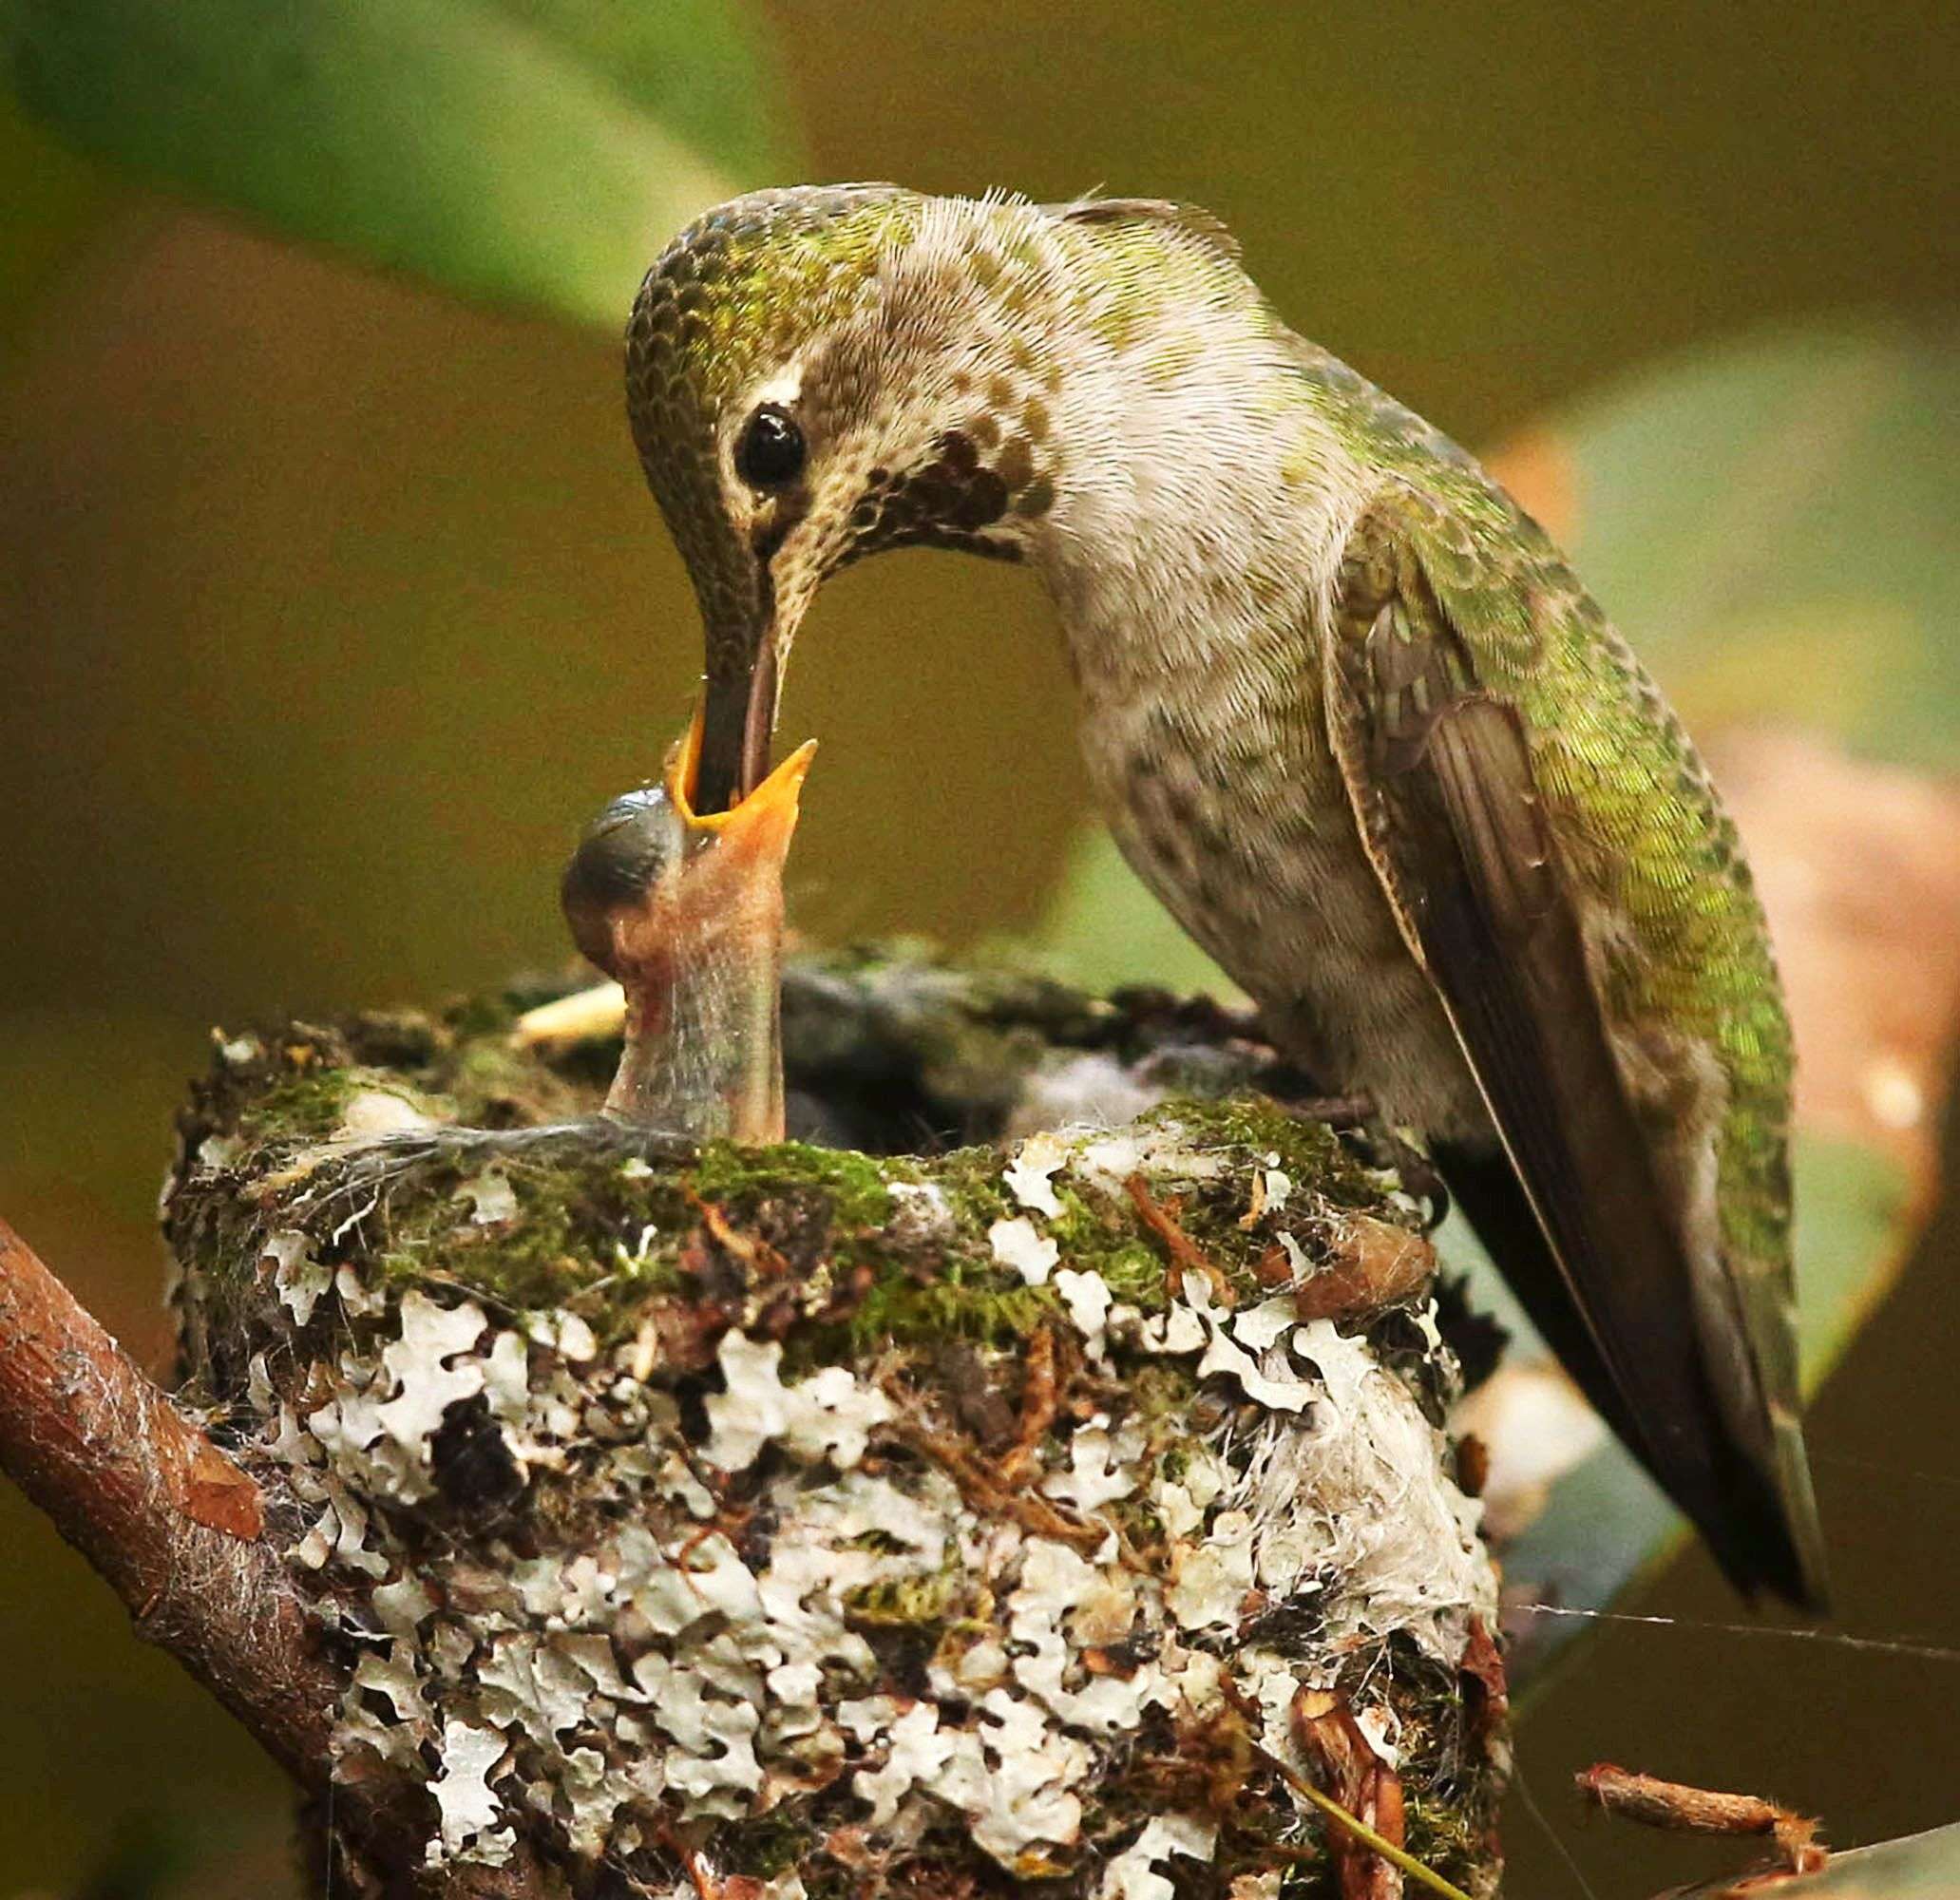 An Anna's Hummingbird feeds a recently hatched chick in a nest outside The Register-Guard newspaper offices in Eugene, Ore. (AP Photo/The Register-Guard)